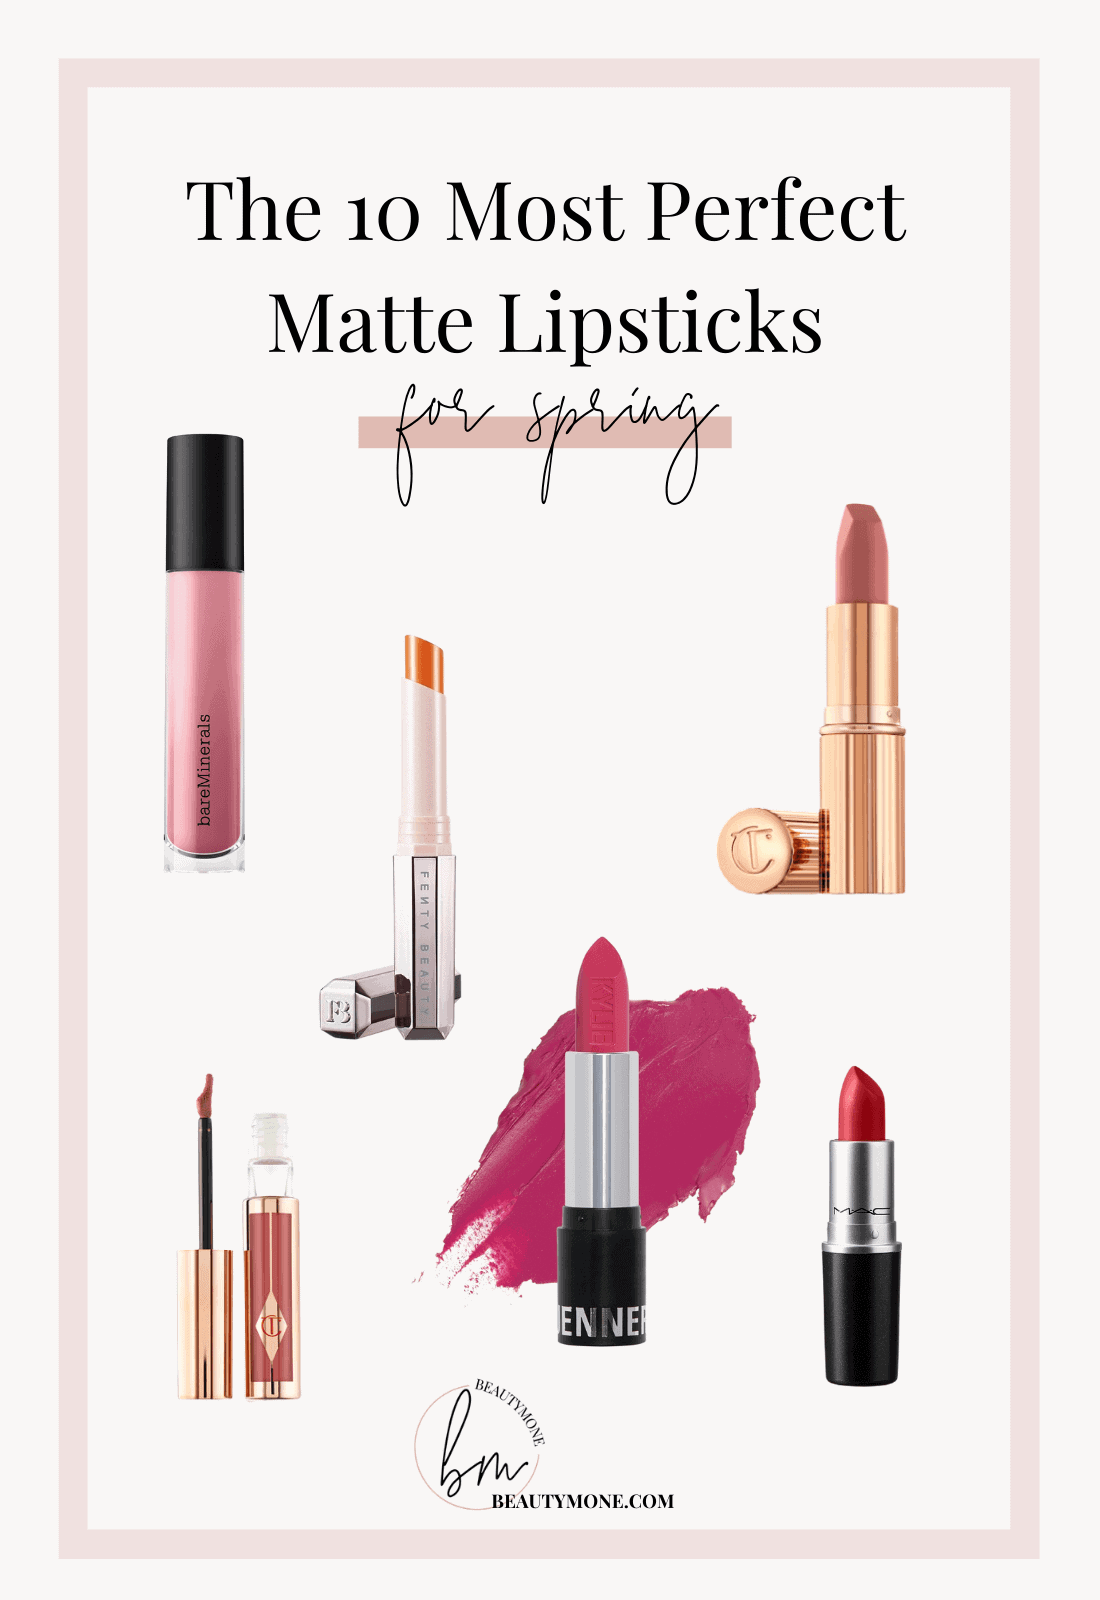 The 10 Most Perfect Matte Lipsticks For Spring ⋆ Beautymone